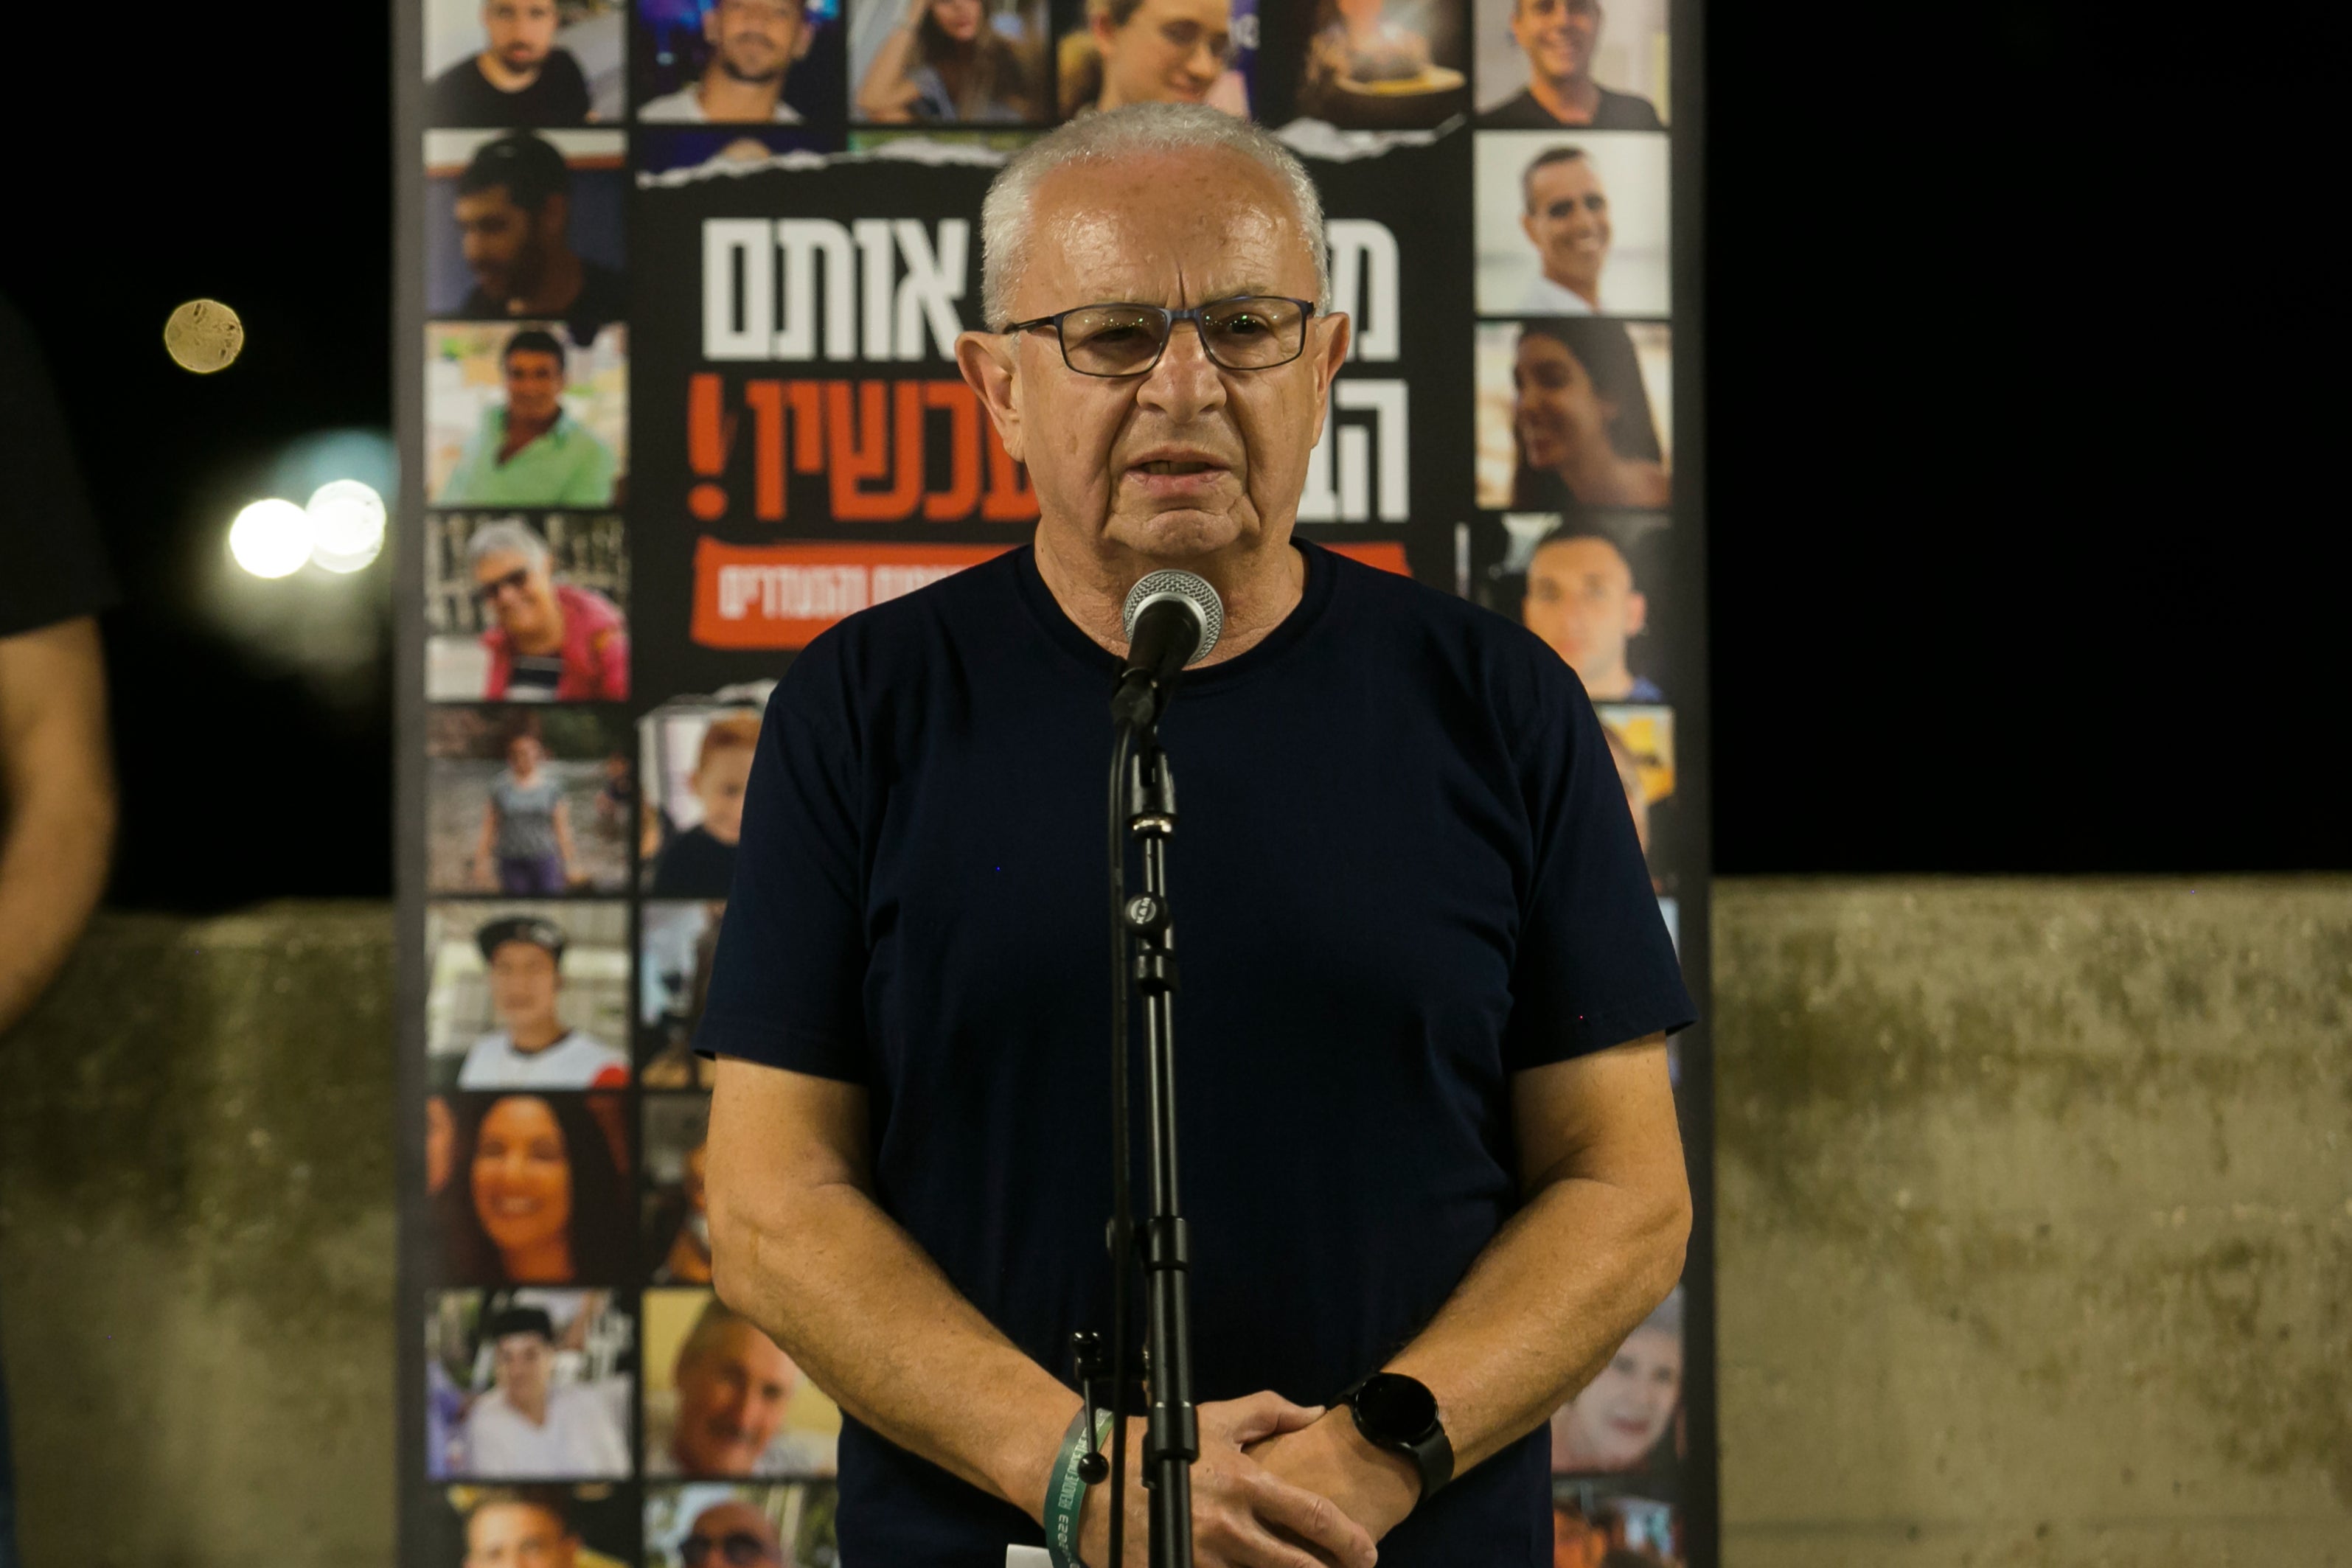 Ramos Aloni, father of hostage Danielle Aloni, who featured in the video released by Hamas, speaks at a press conference